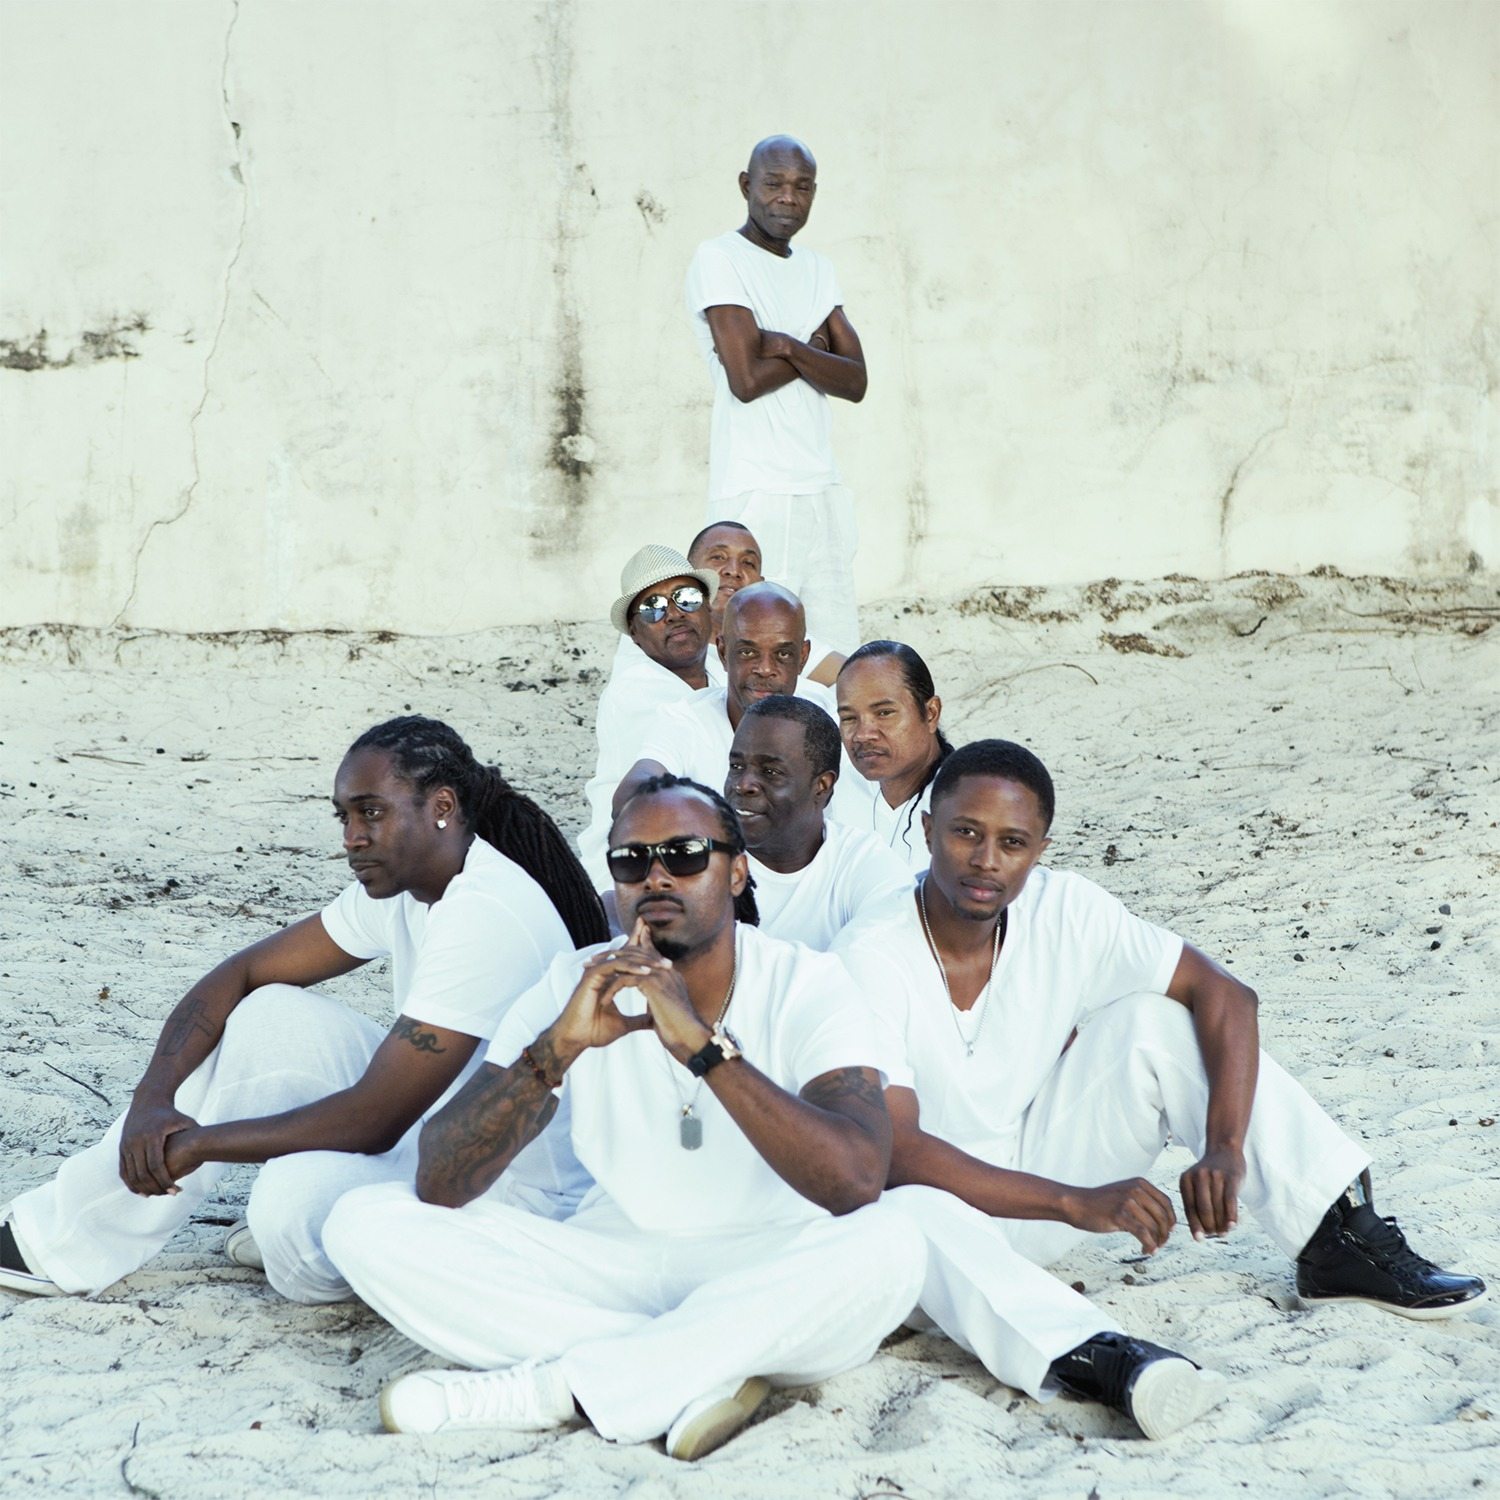 The Baha Men’s Rik Carey and Dyson Knight talk Bahamas, latest album “Ride With Me,” life after “Who Let The Dogs Out?” and more